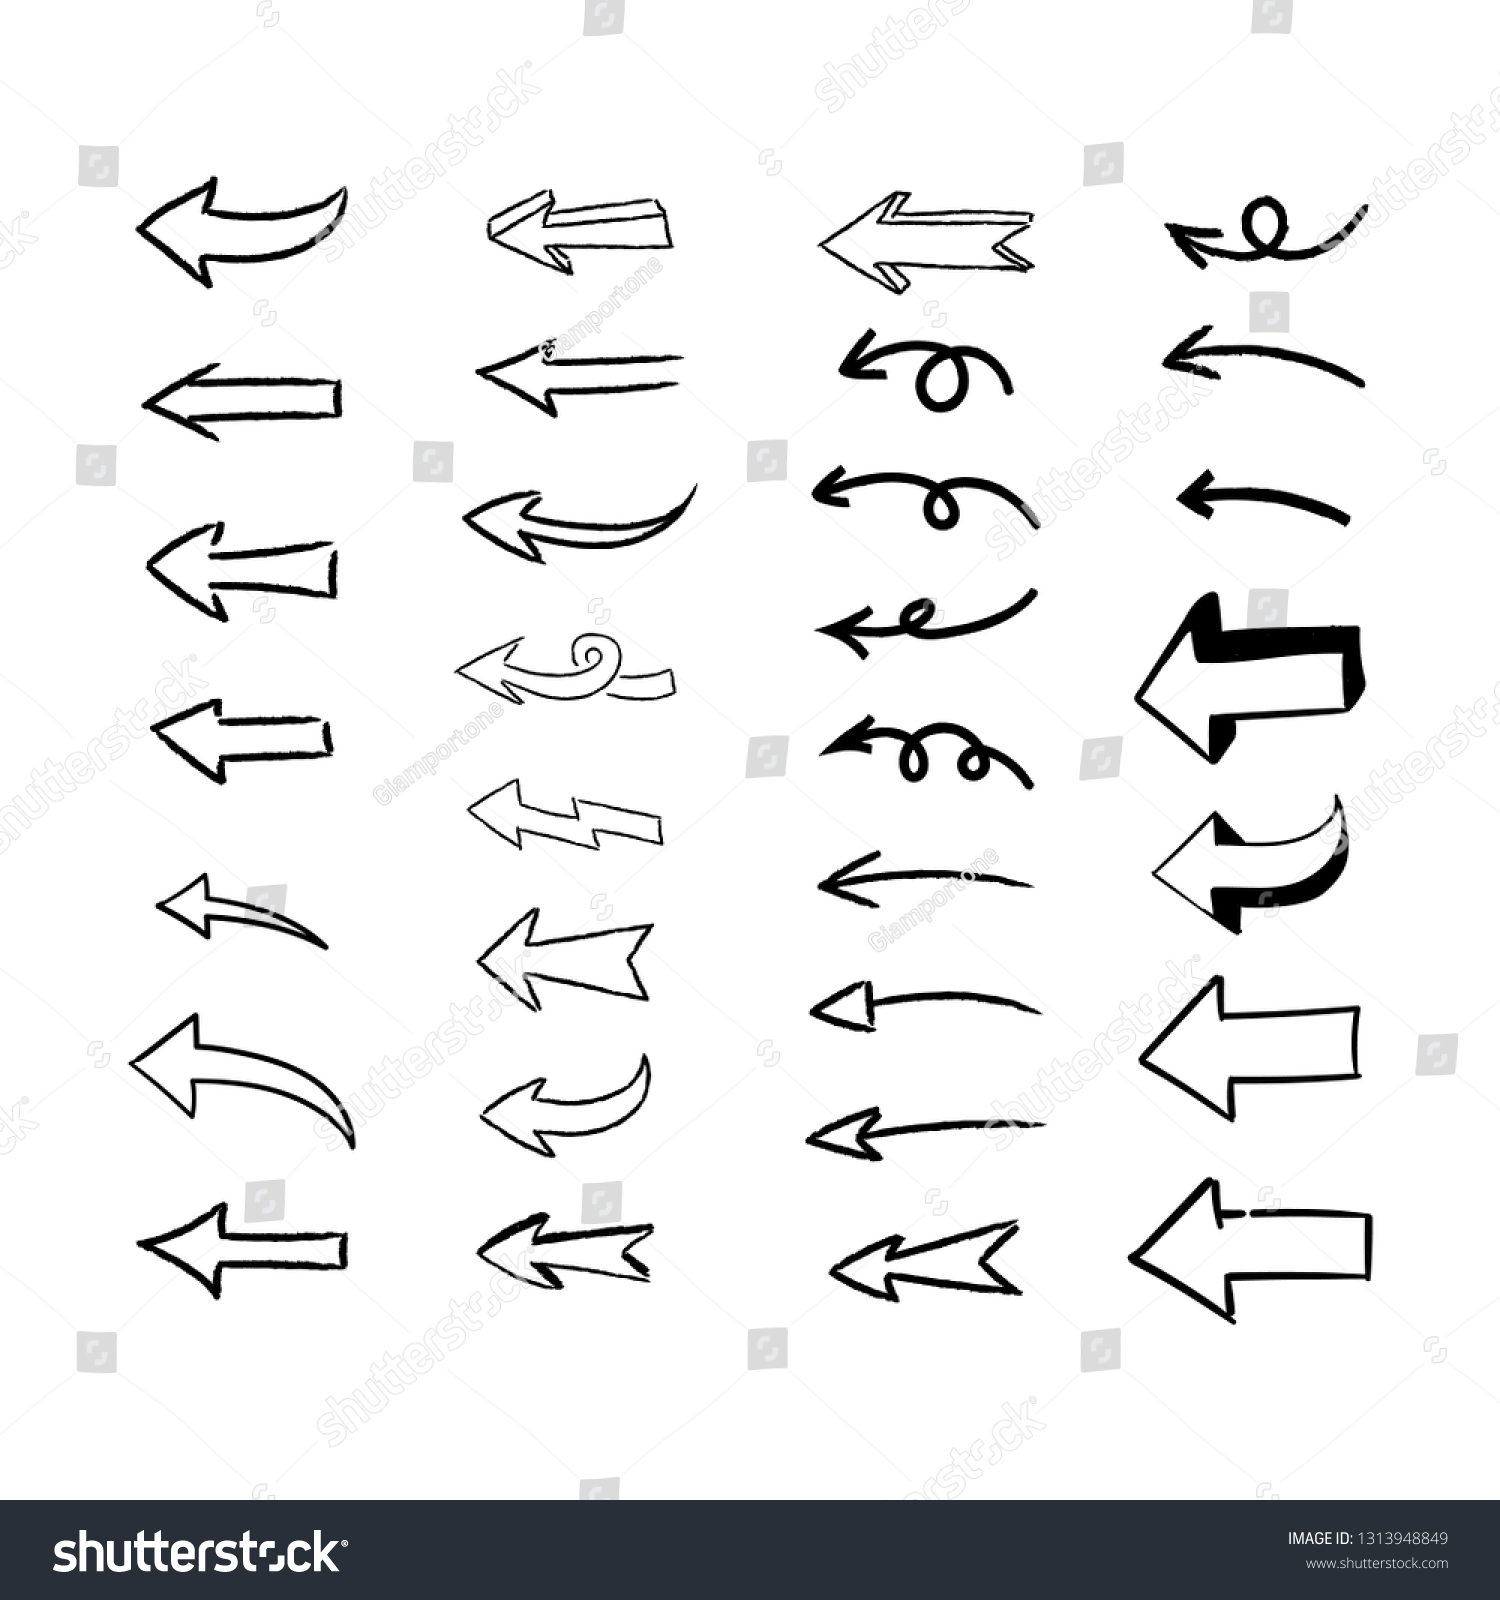 Arrow doodles, isolated vector elements #1313948849